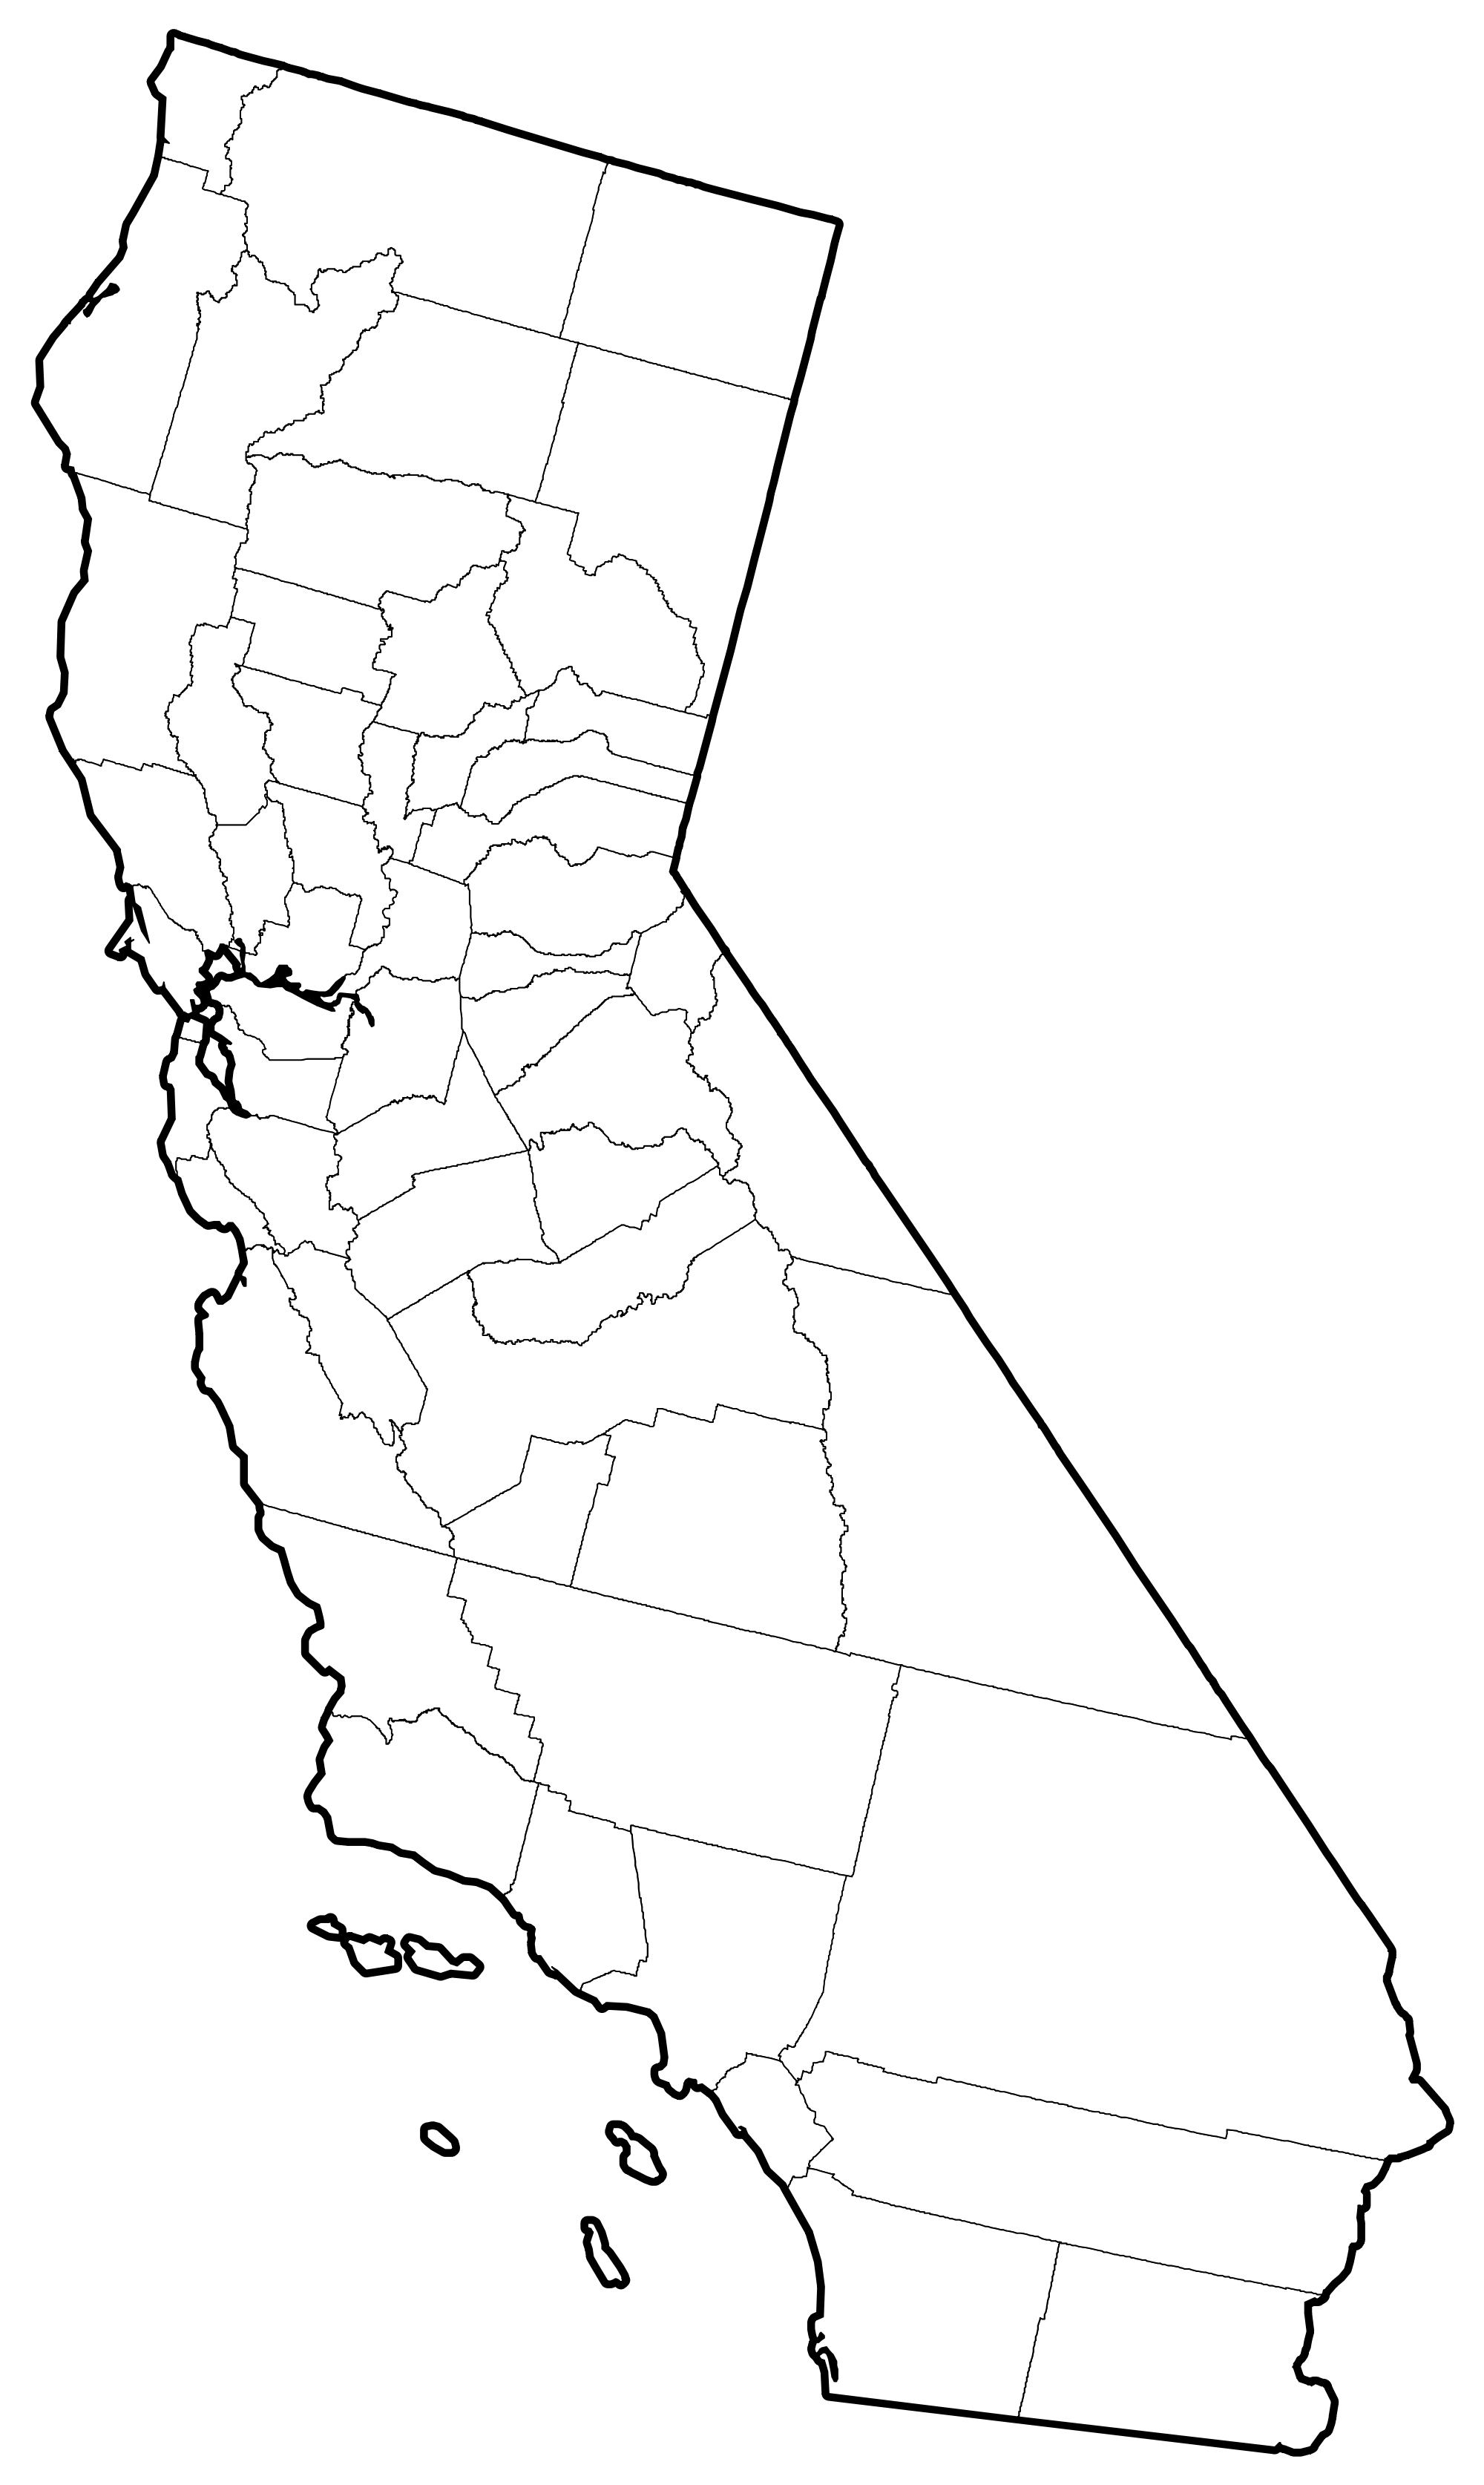 california-county-map-outline-topographic-map-of-usa-with-states